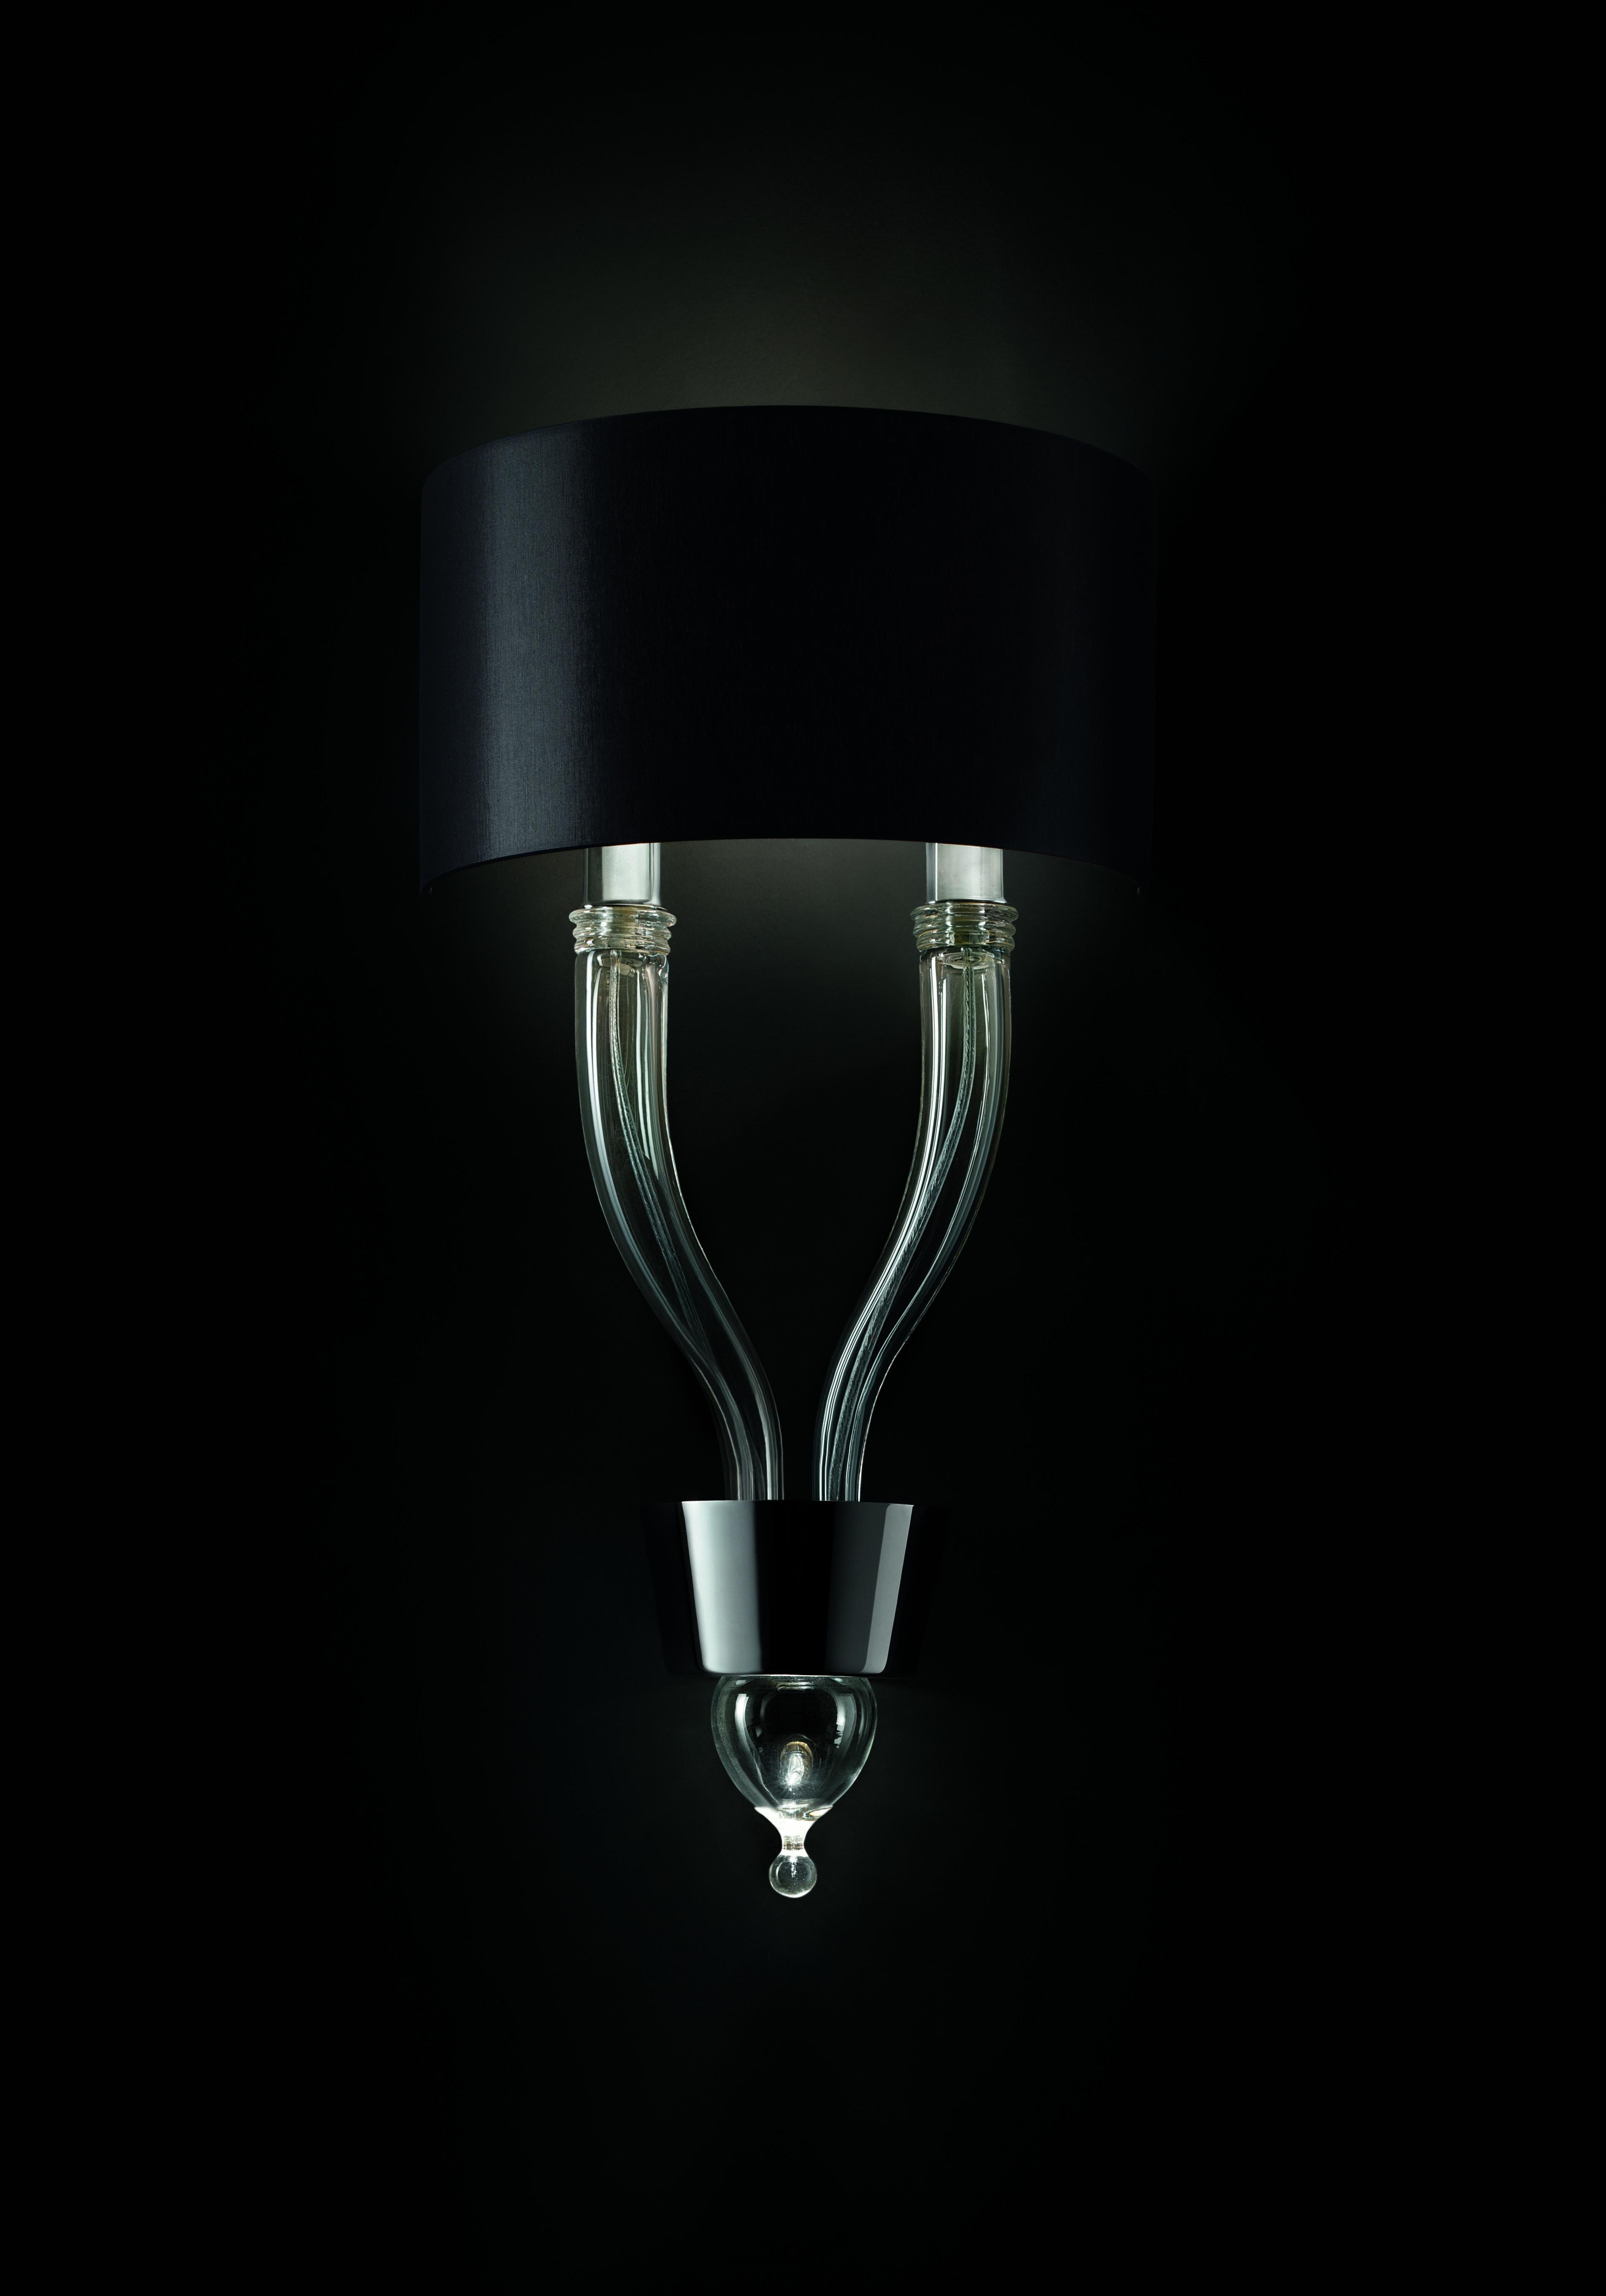 Clear (Crystal_CC) Pandora 5675 02 Wall Sconce in Glass with Black Shade, by Barovier&Toso 2